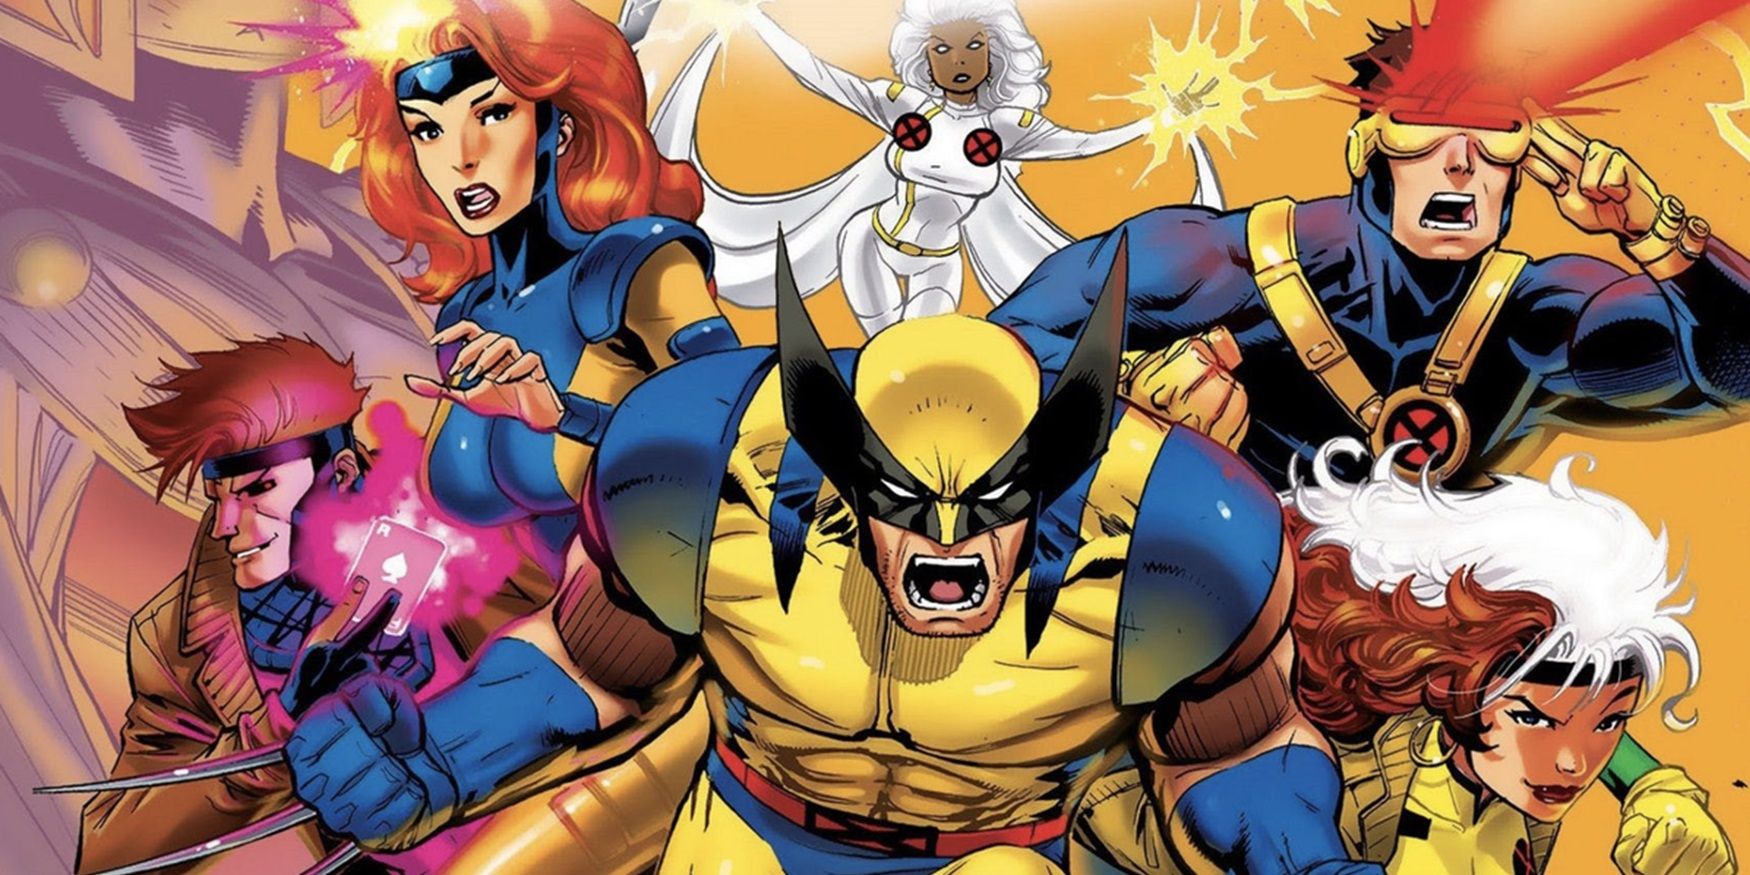 X Men '97 Should Embrace What Made